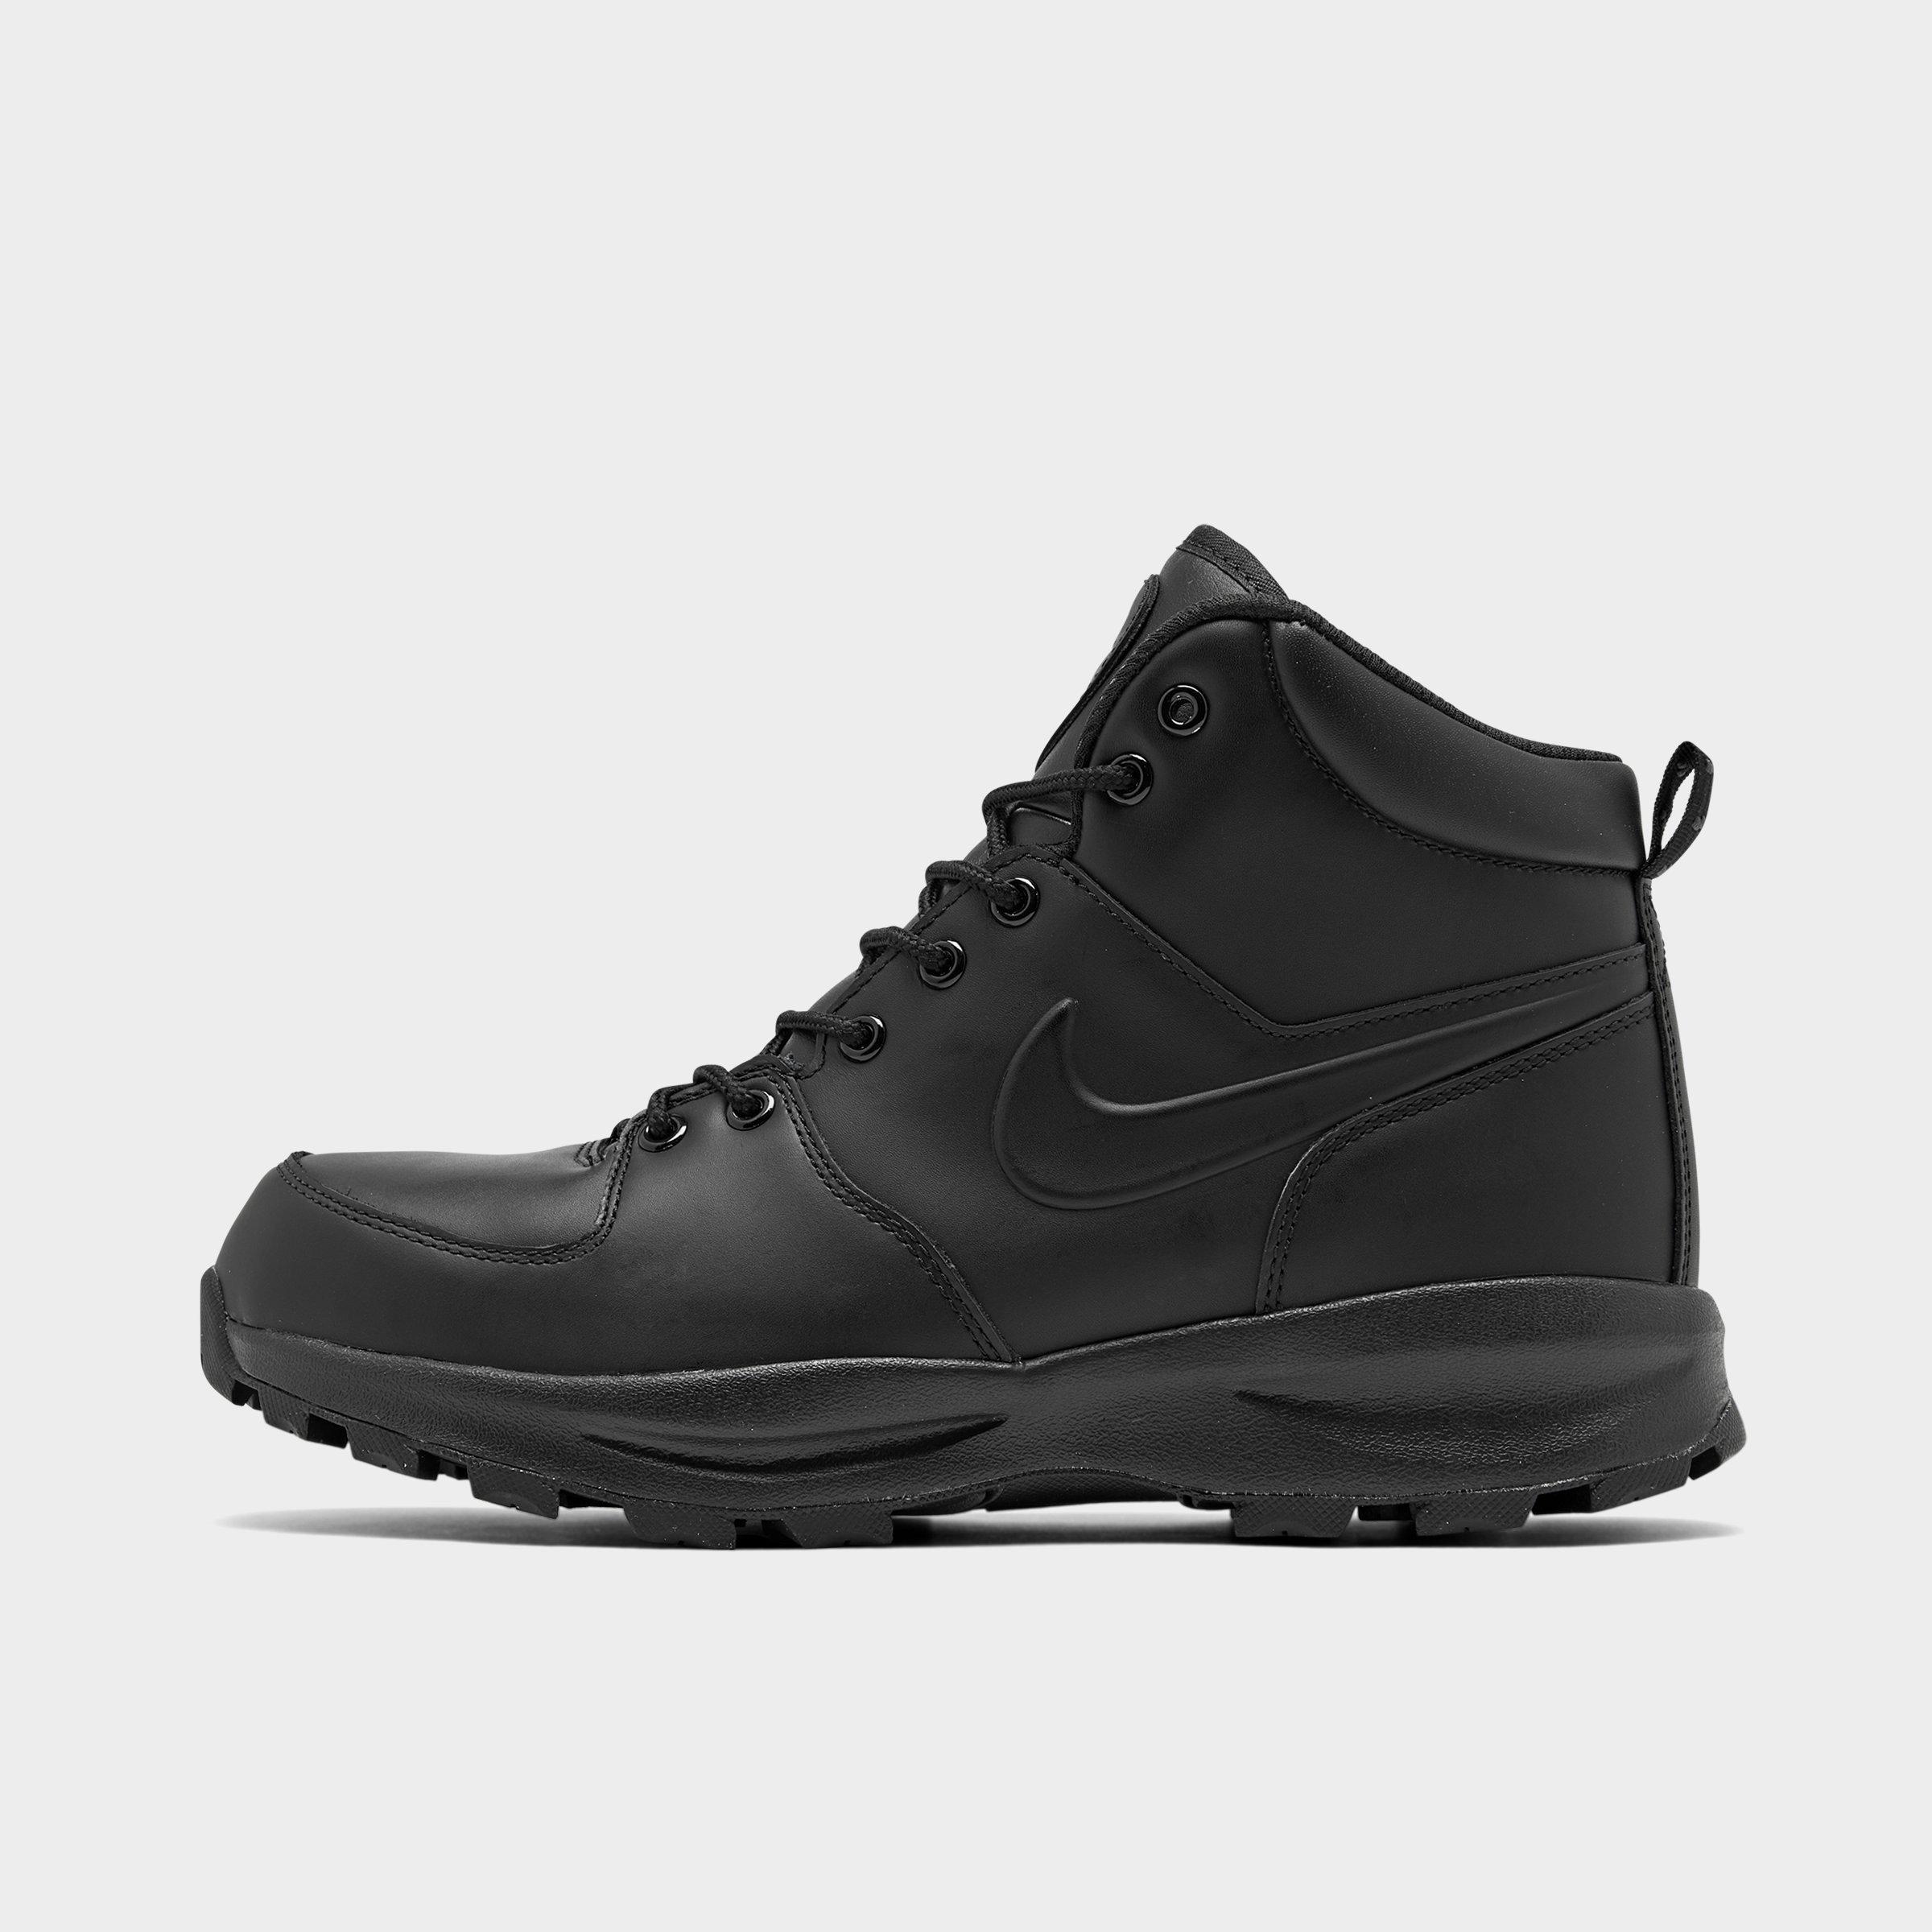 nike boots online